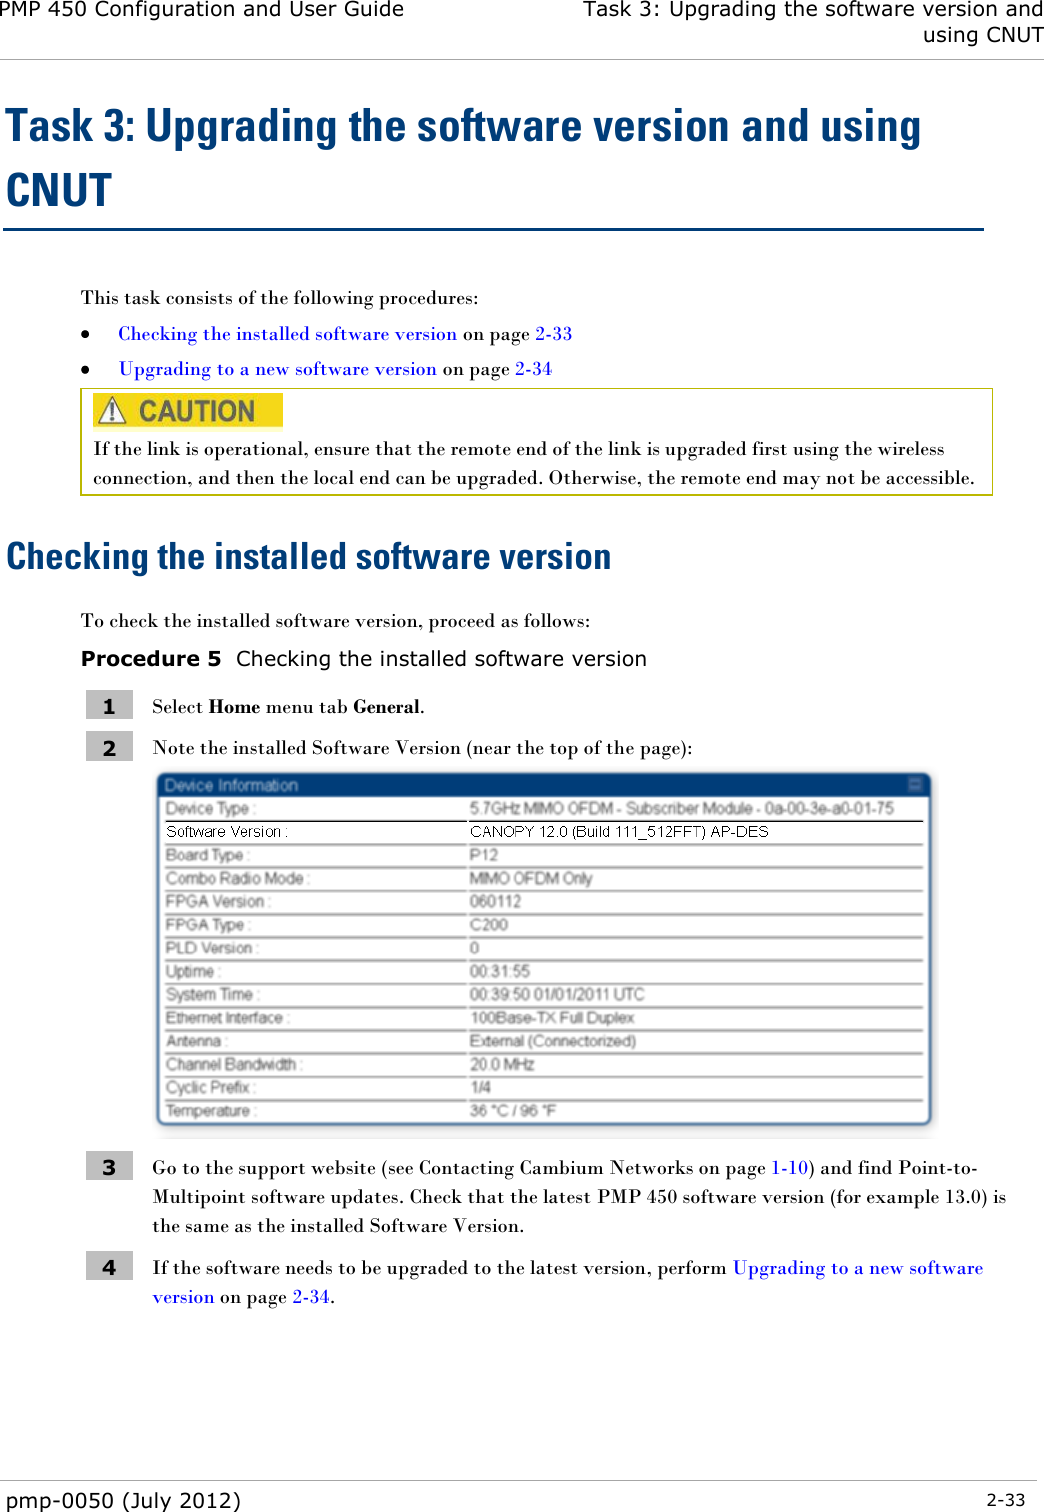 PMP 450 Configuration and User Guide Task 3: Upgrading the software version and using CNUT  pmp-0050 (July 2012)  2-33  Task 3: Upgrading the software version and using CNUT This task consists of the following procedures:  Checking the installed software version on page 2-33  Upgrading to a new software version on page 2-34  If the link is operational, ensure that the remote end of the link is upgraded first using the wireless connection, and then the local end can be upgraded. Otherwise, the remote end may not be accessible. Checking the installed software version To check the installed software version, proceed as follows: Procedure 5  Checking the installed software version 1 Select Home menu tab General. 2 Note the installed Software Version (near the top of the page):  3 Go to the support website (see Contacting Cambium Networks on page 1-10) and find Point-to-Multipoint software updates. Check that the latest PMP 450 software version (for example 13.0) is the same as the installed Software Version. 4 If the software needs to be upgraded to the latest version, perform Upgrading to a new software version on page 2-34.  